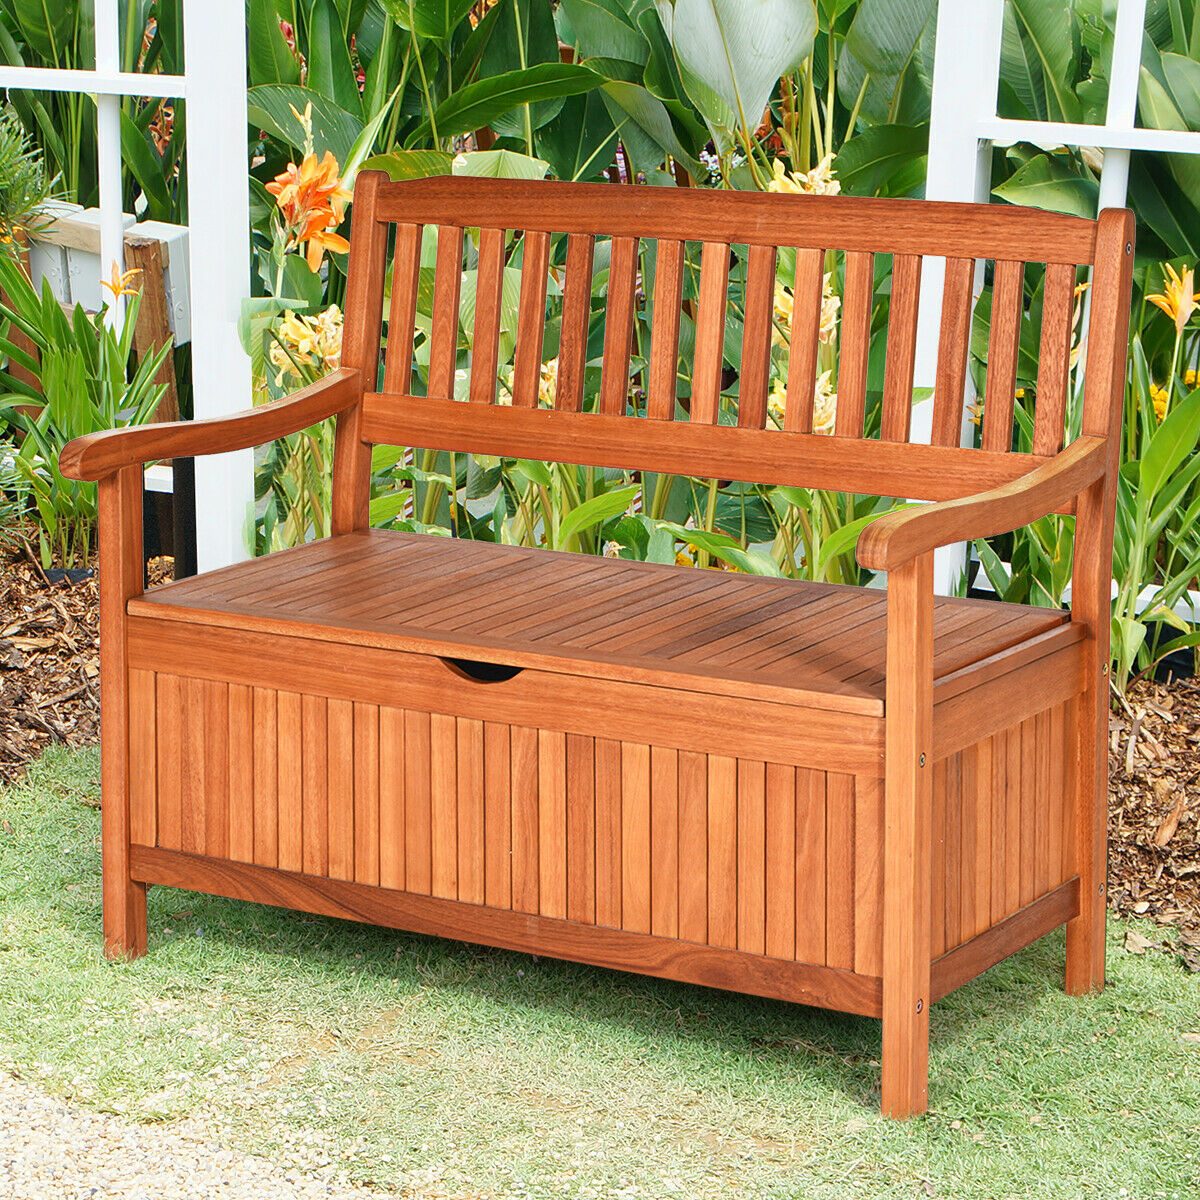 42'' Storage Bench Deck Box Solid Wood Seating Container Tools Toys W/Backrest